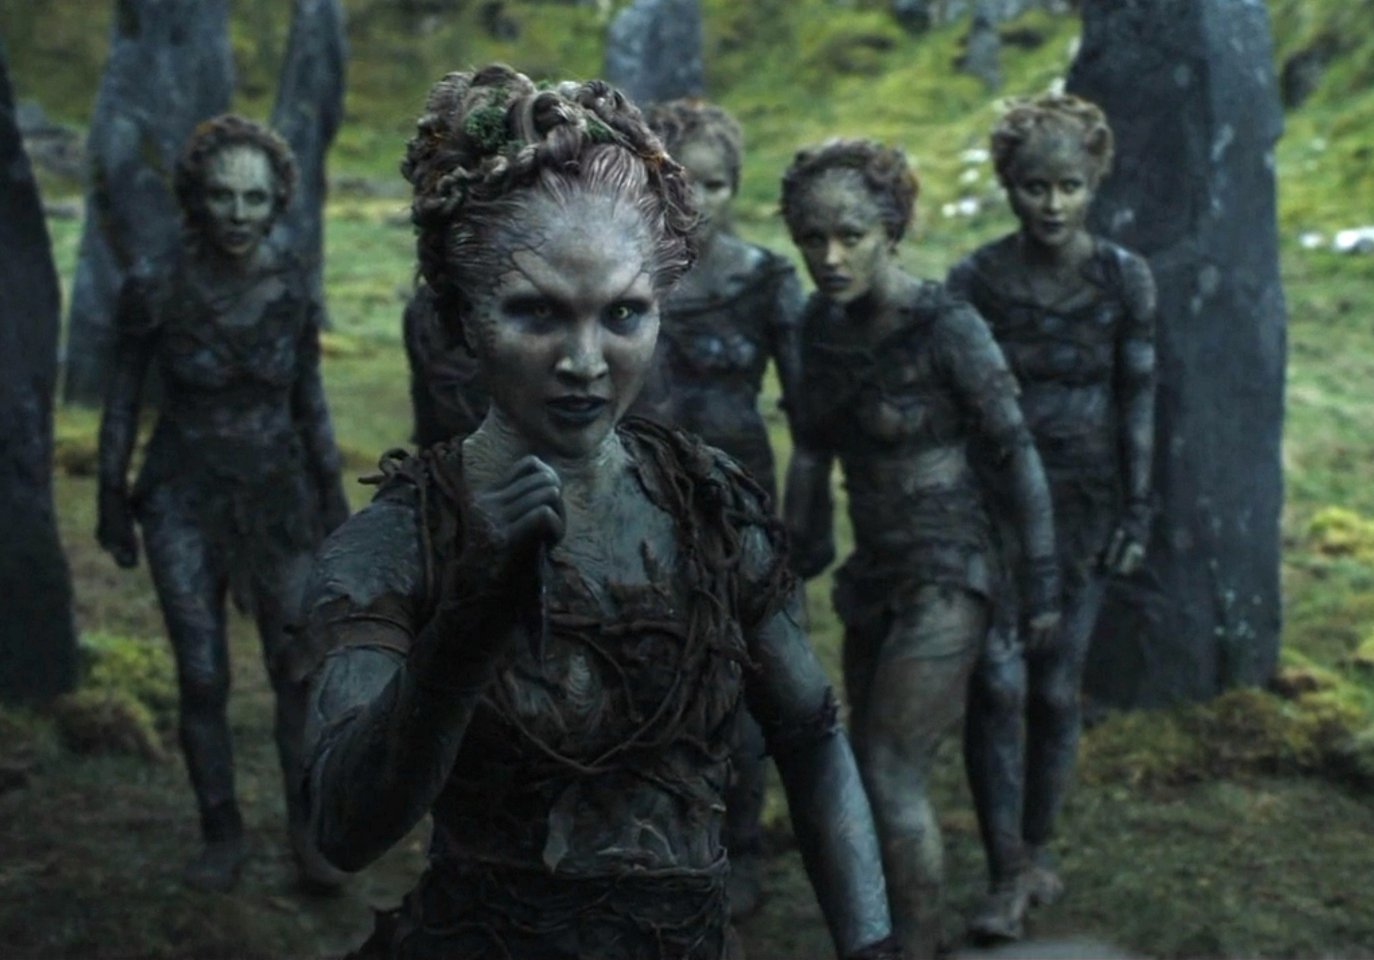 The Children of the Forest from Game of Thrones